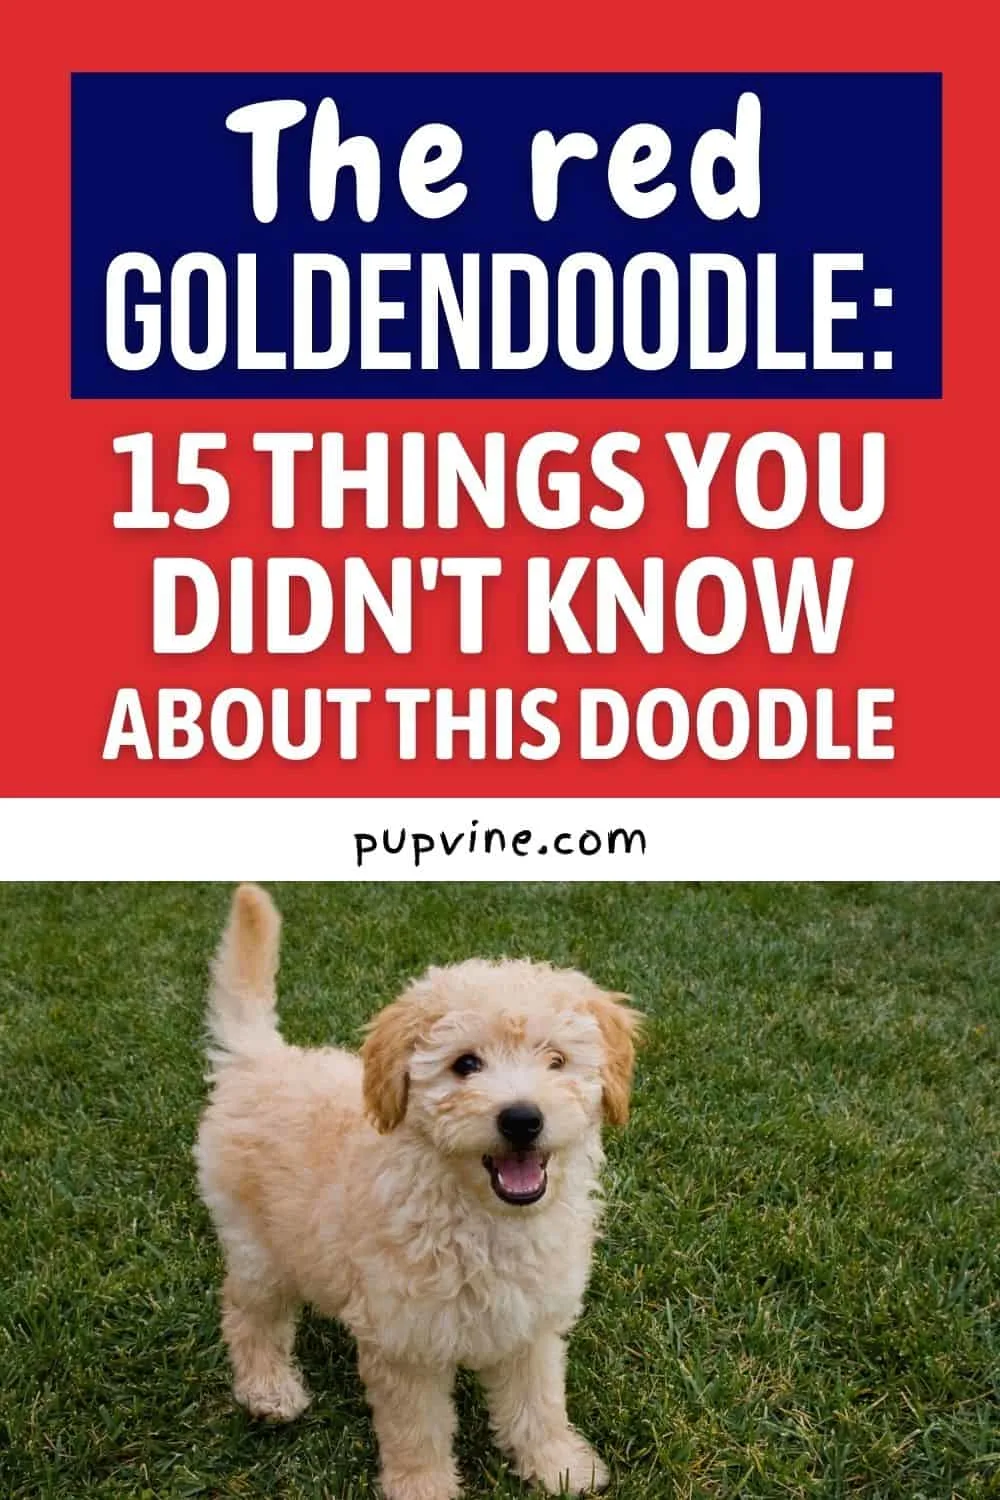 The Red Goldendoodle: 15 Things You Didn't Know About This Doodle